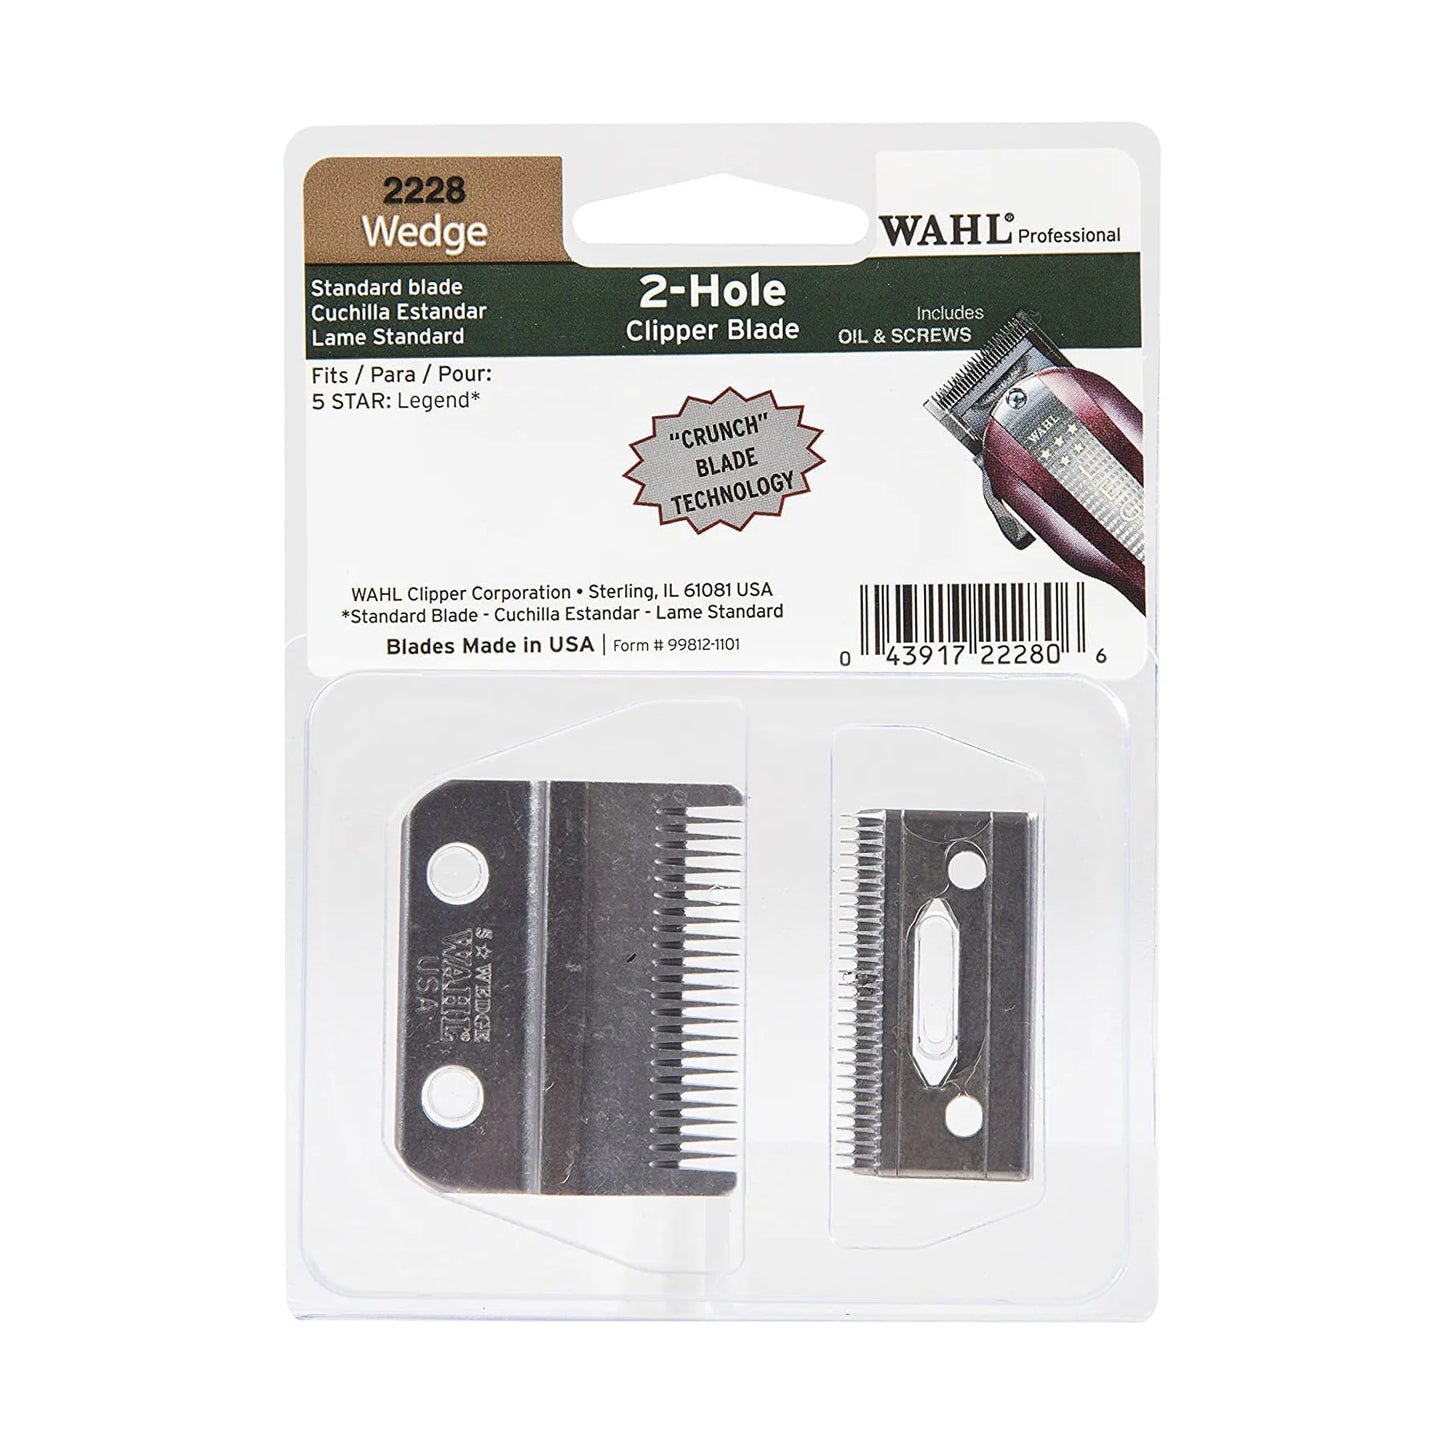 WAHL Professional Wedge 2 Hole Standard Clipper Blade - Model #2228